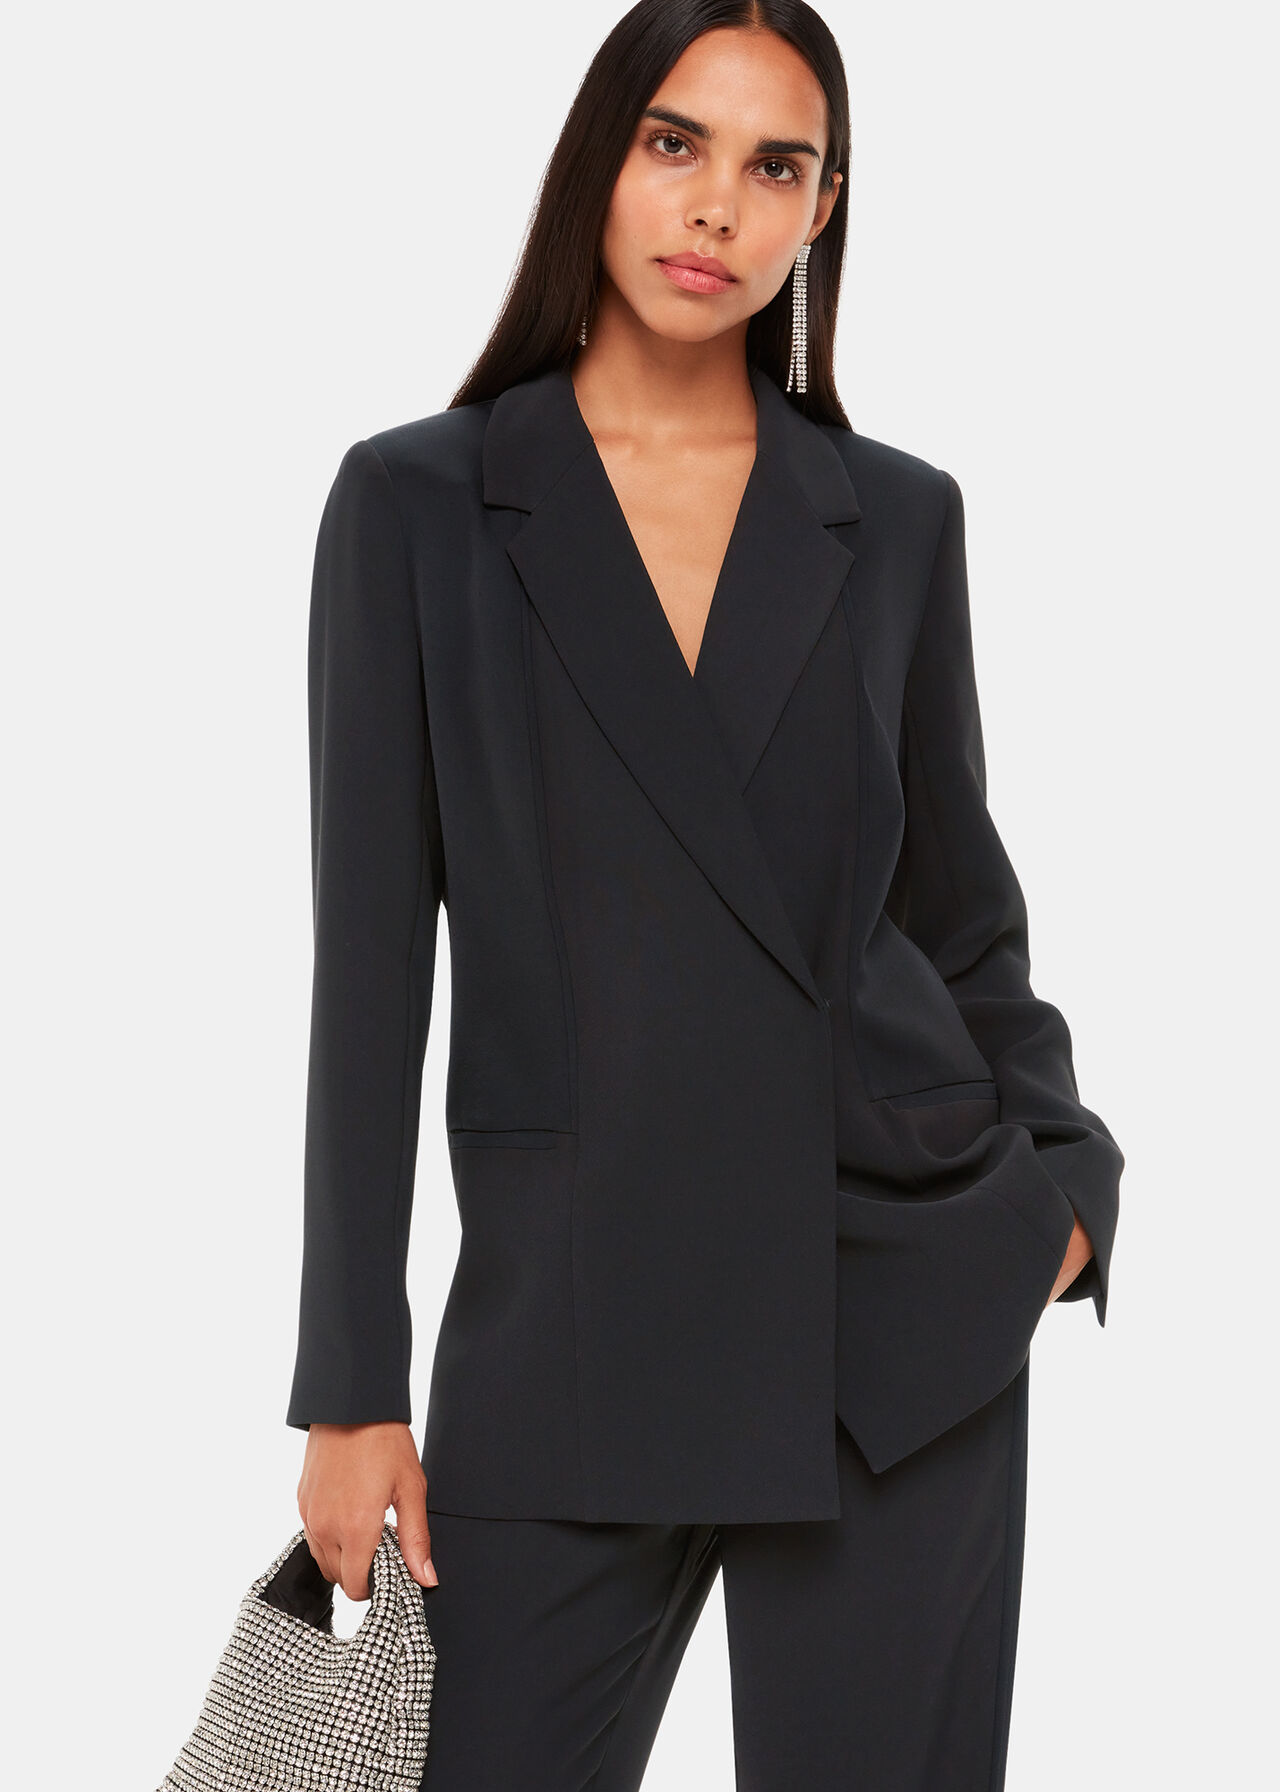 Black Tailored Blazer with Button Front | Whistles | Whistles UK